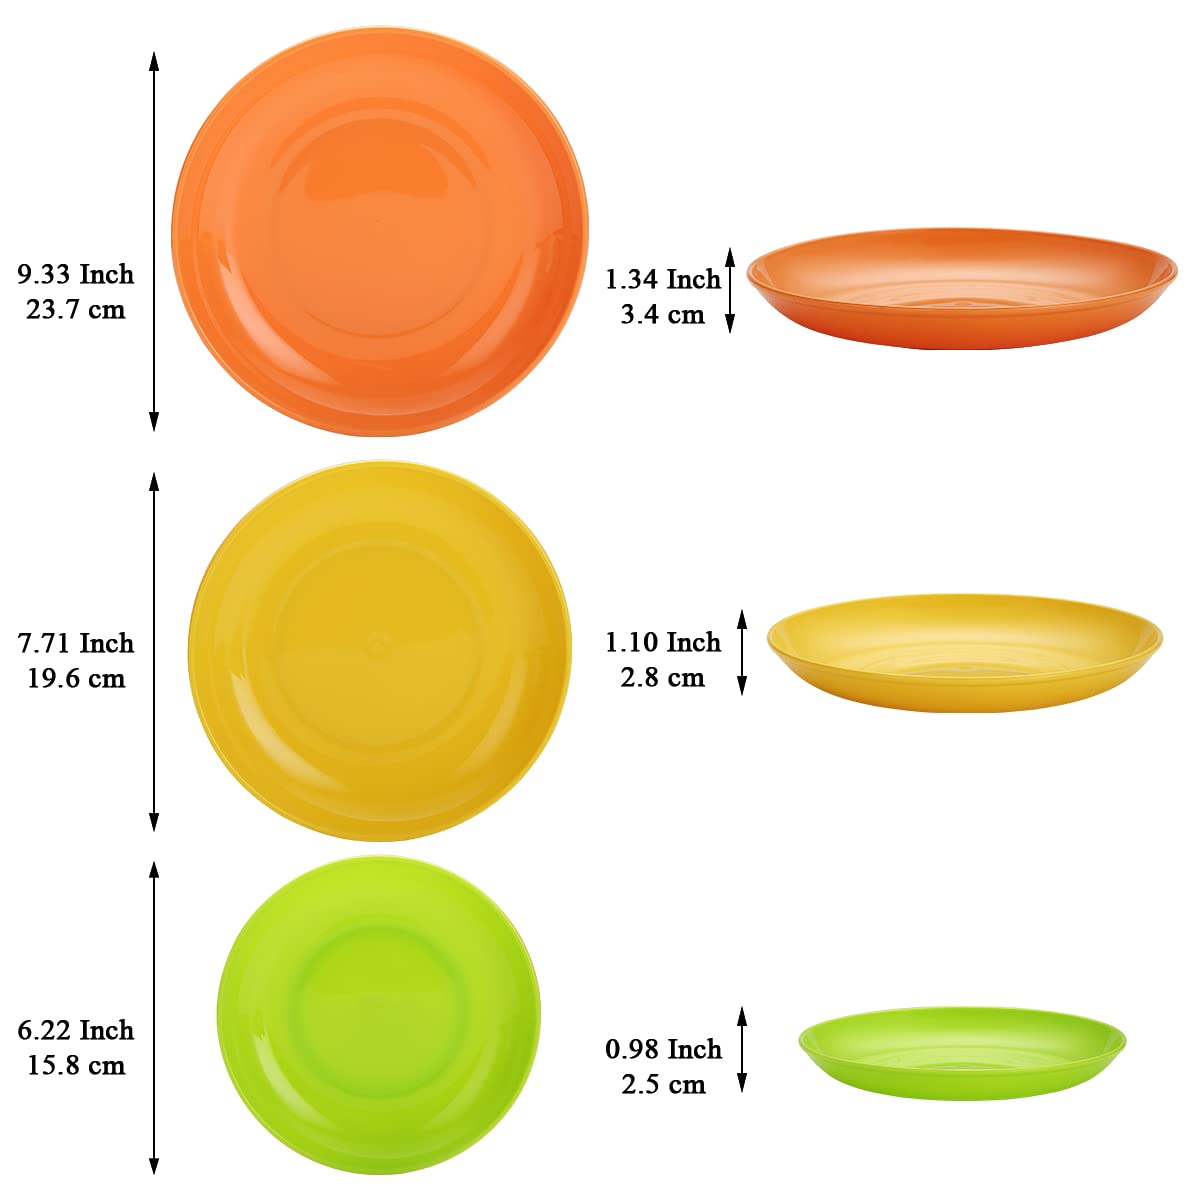 Evanda Plastic Plates Set of 12 Pieces, Dinner Plates 3 Size 6.25/7.75/9.25 inch Unbreakable Reusable Dishes for All Purpose and All Age, Microwave Safe BPA Free Dishwasher Safe